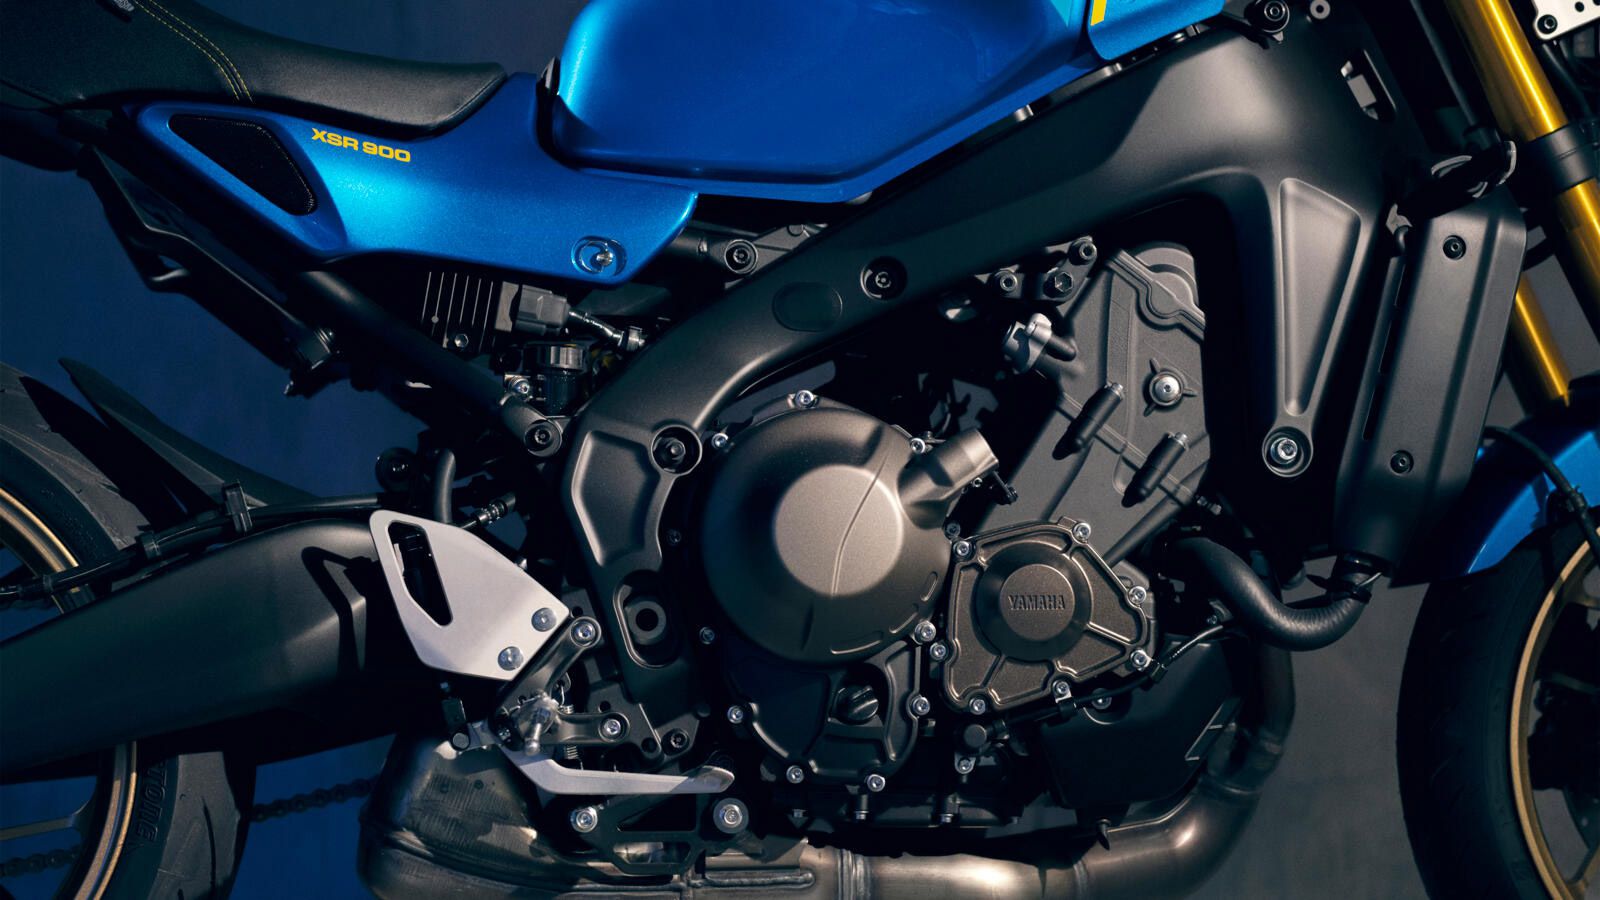 The 2022 XSR900 gets a more powerful and lighter crossplane-triple engine.